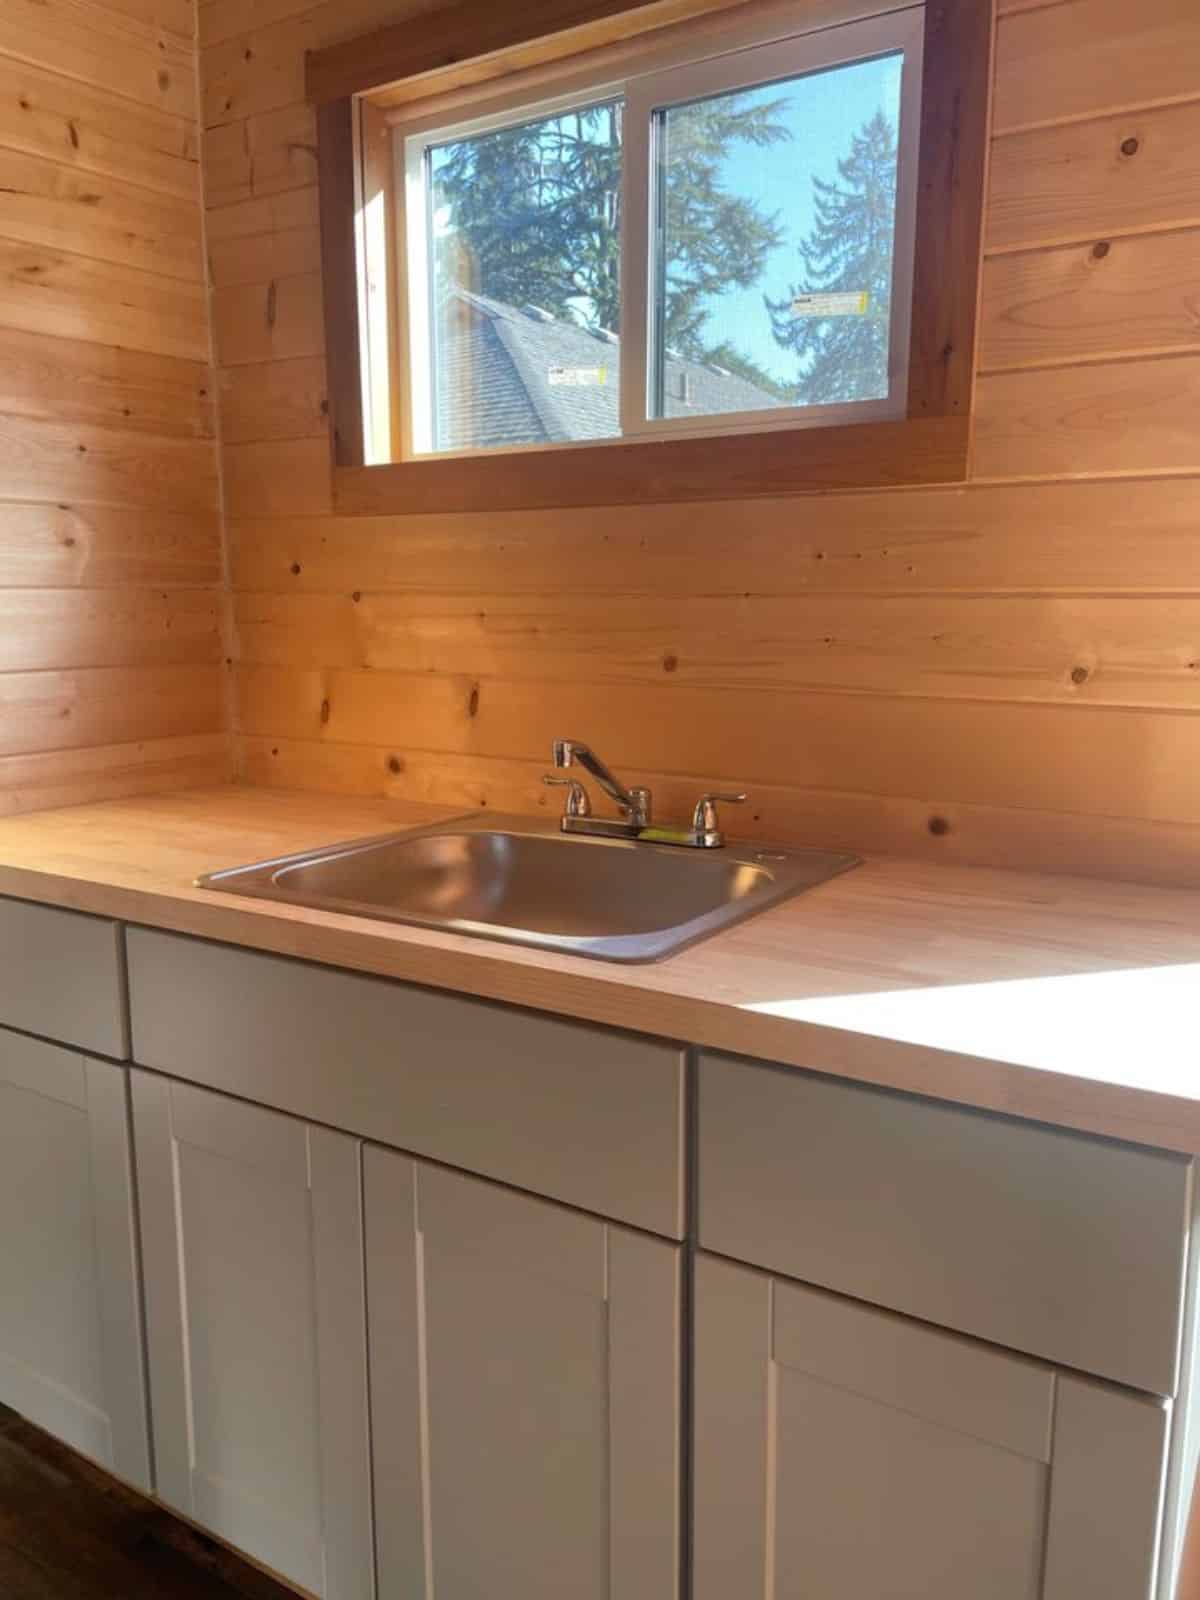 huge countertop with stainless steel sink and multiple storage cabinets in kitchen of 20' tiny trailer house